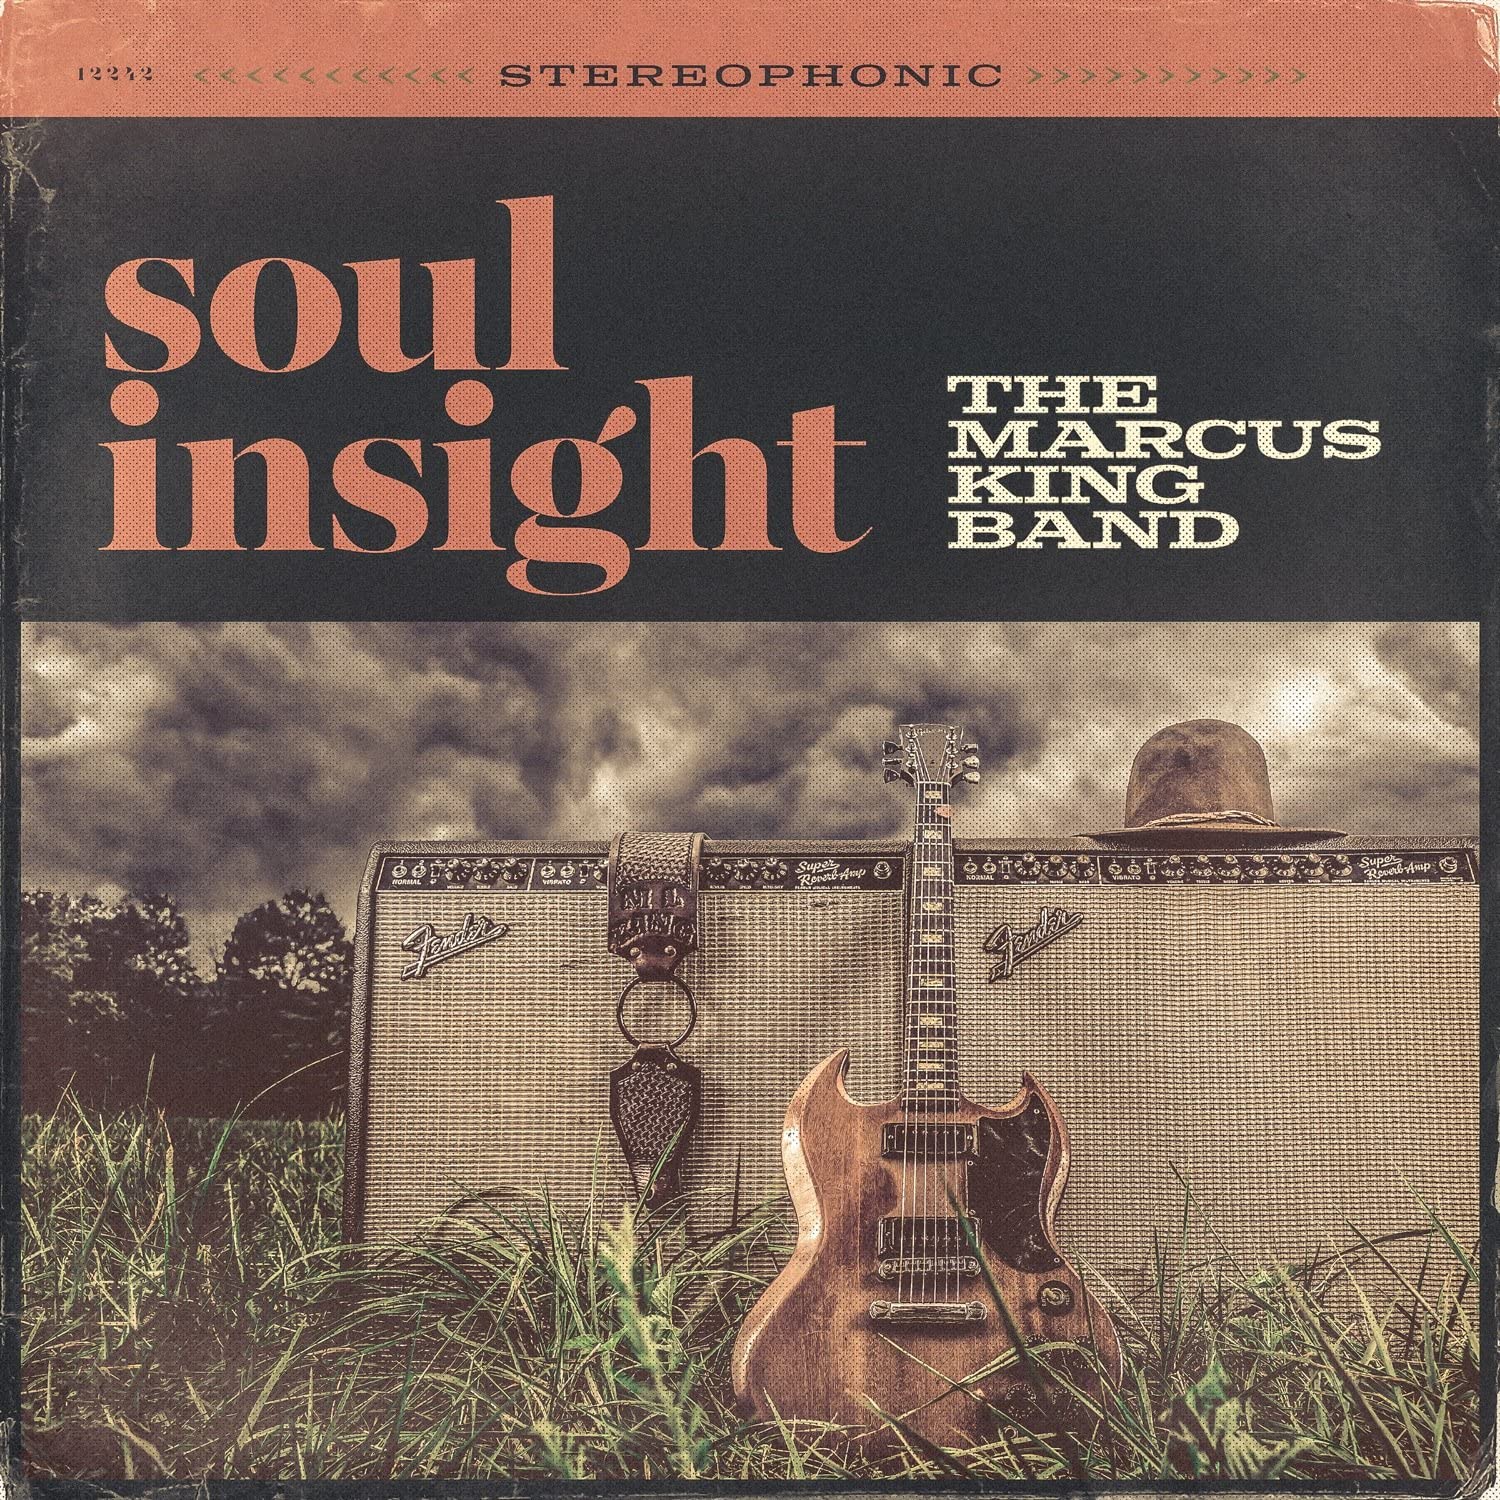 THE MARCUS KING BAND - Soul Insight - 2LP - Vinyl